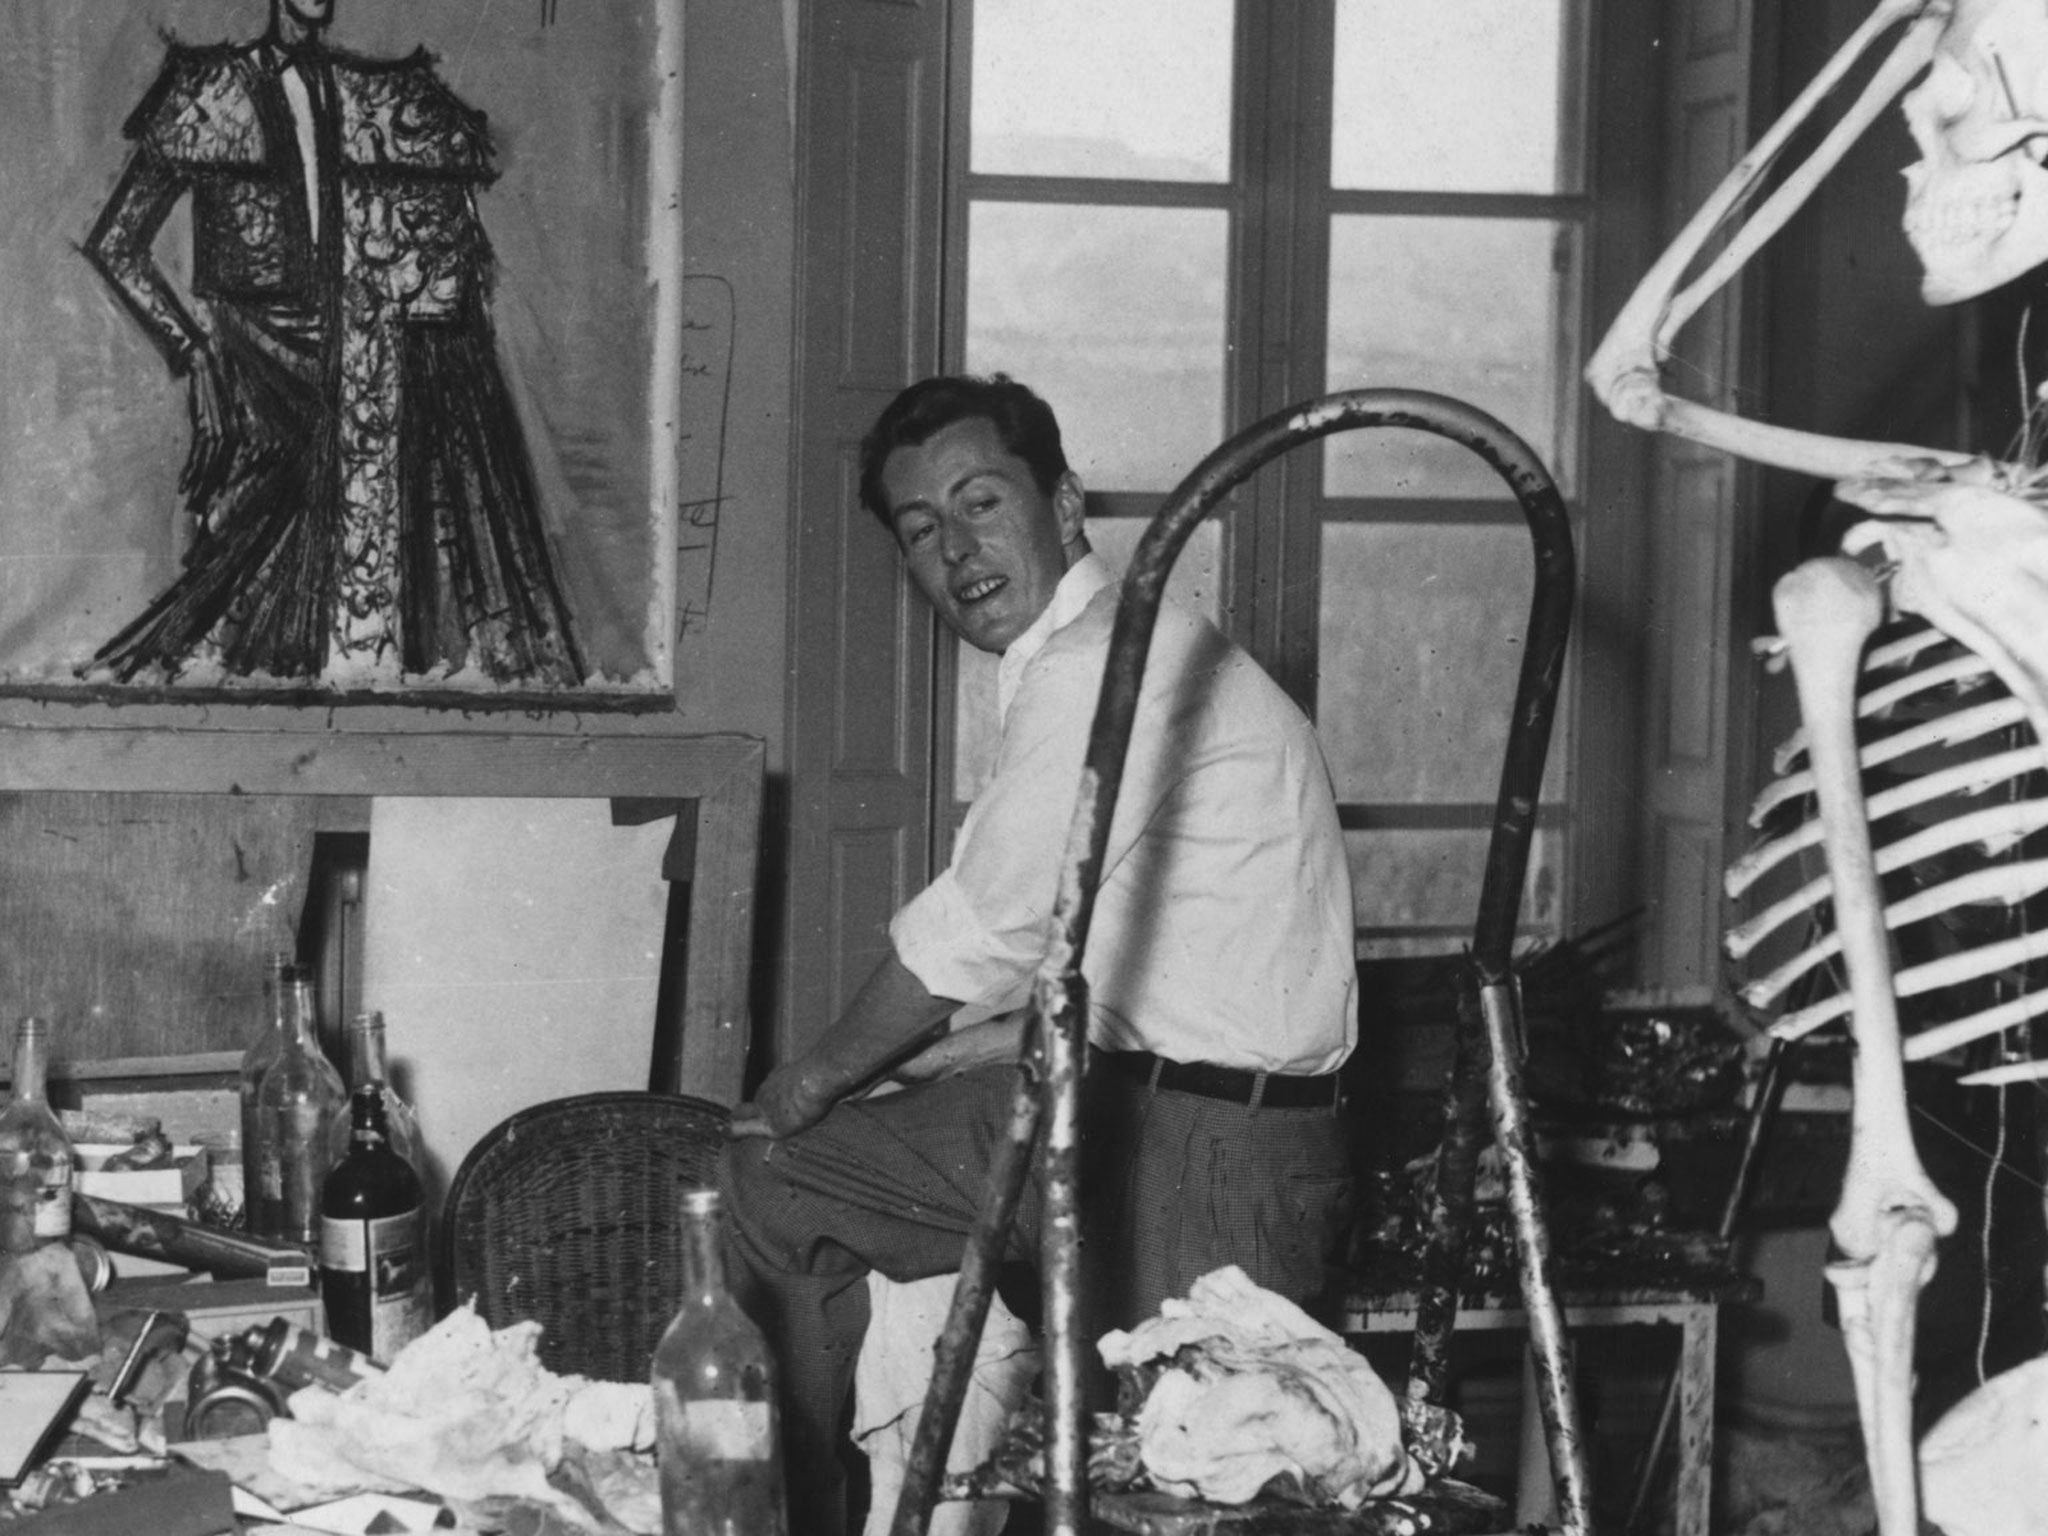 Bohemian cool: the painter Bernard Buffet, one of the best-paid artists in France, at home in his studio in an old chateau in Provence in 1958